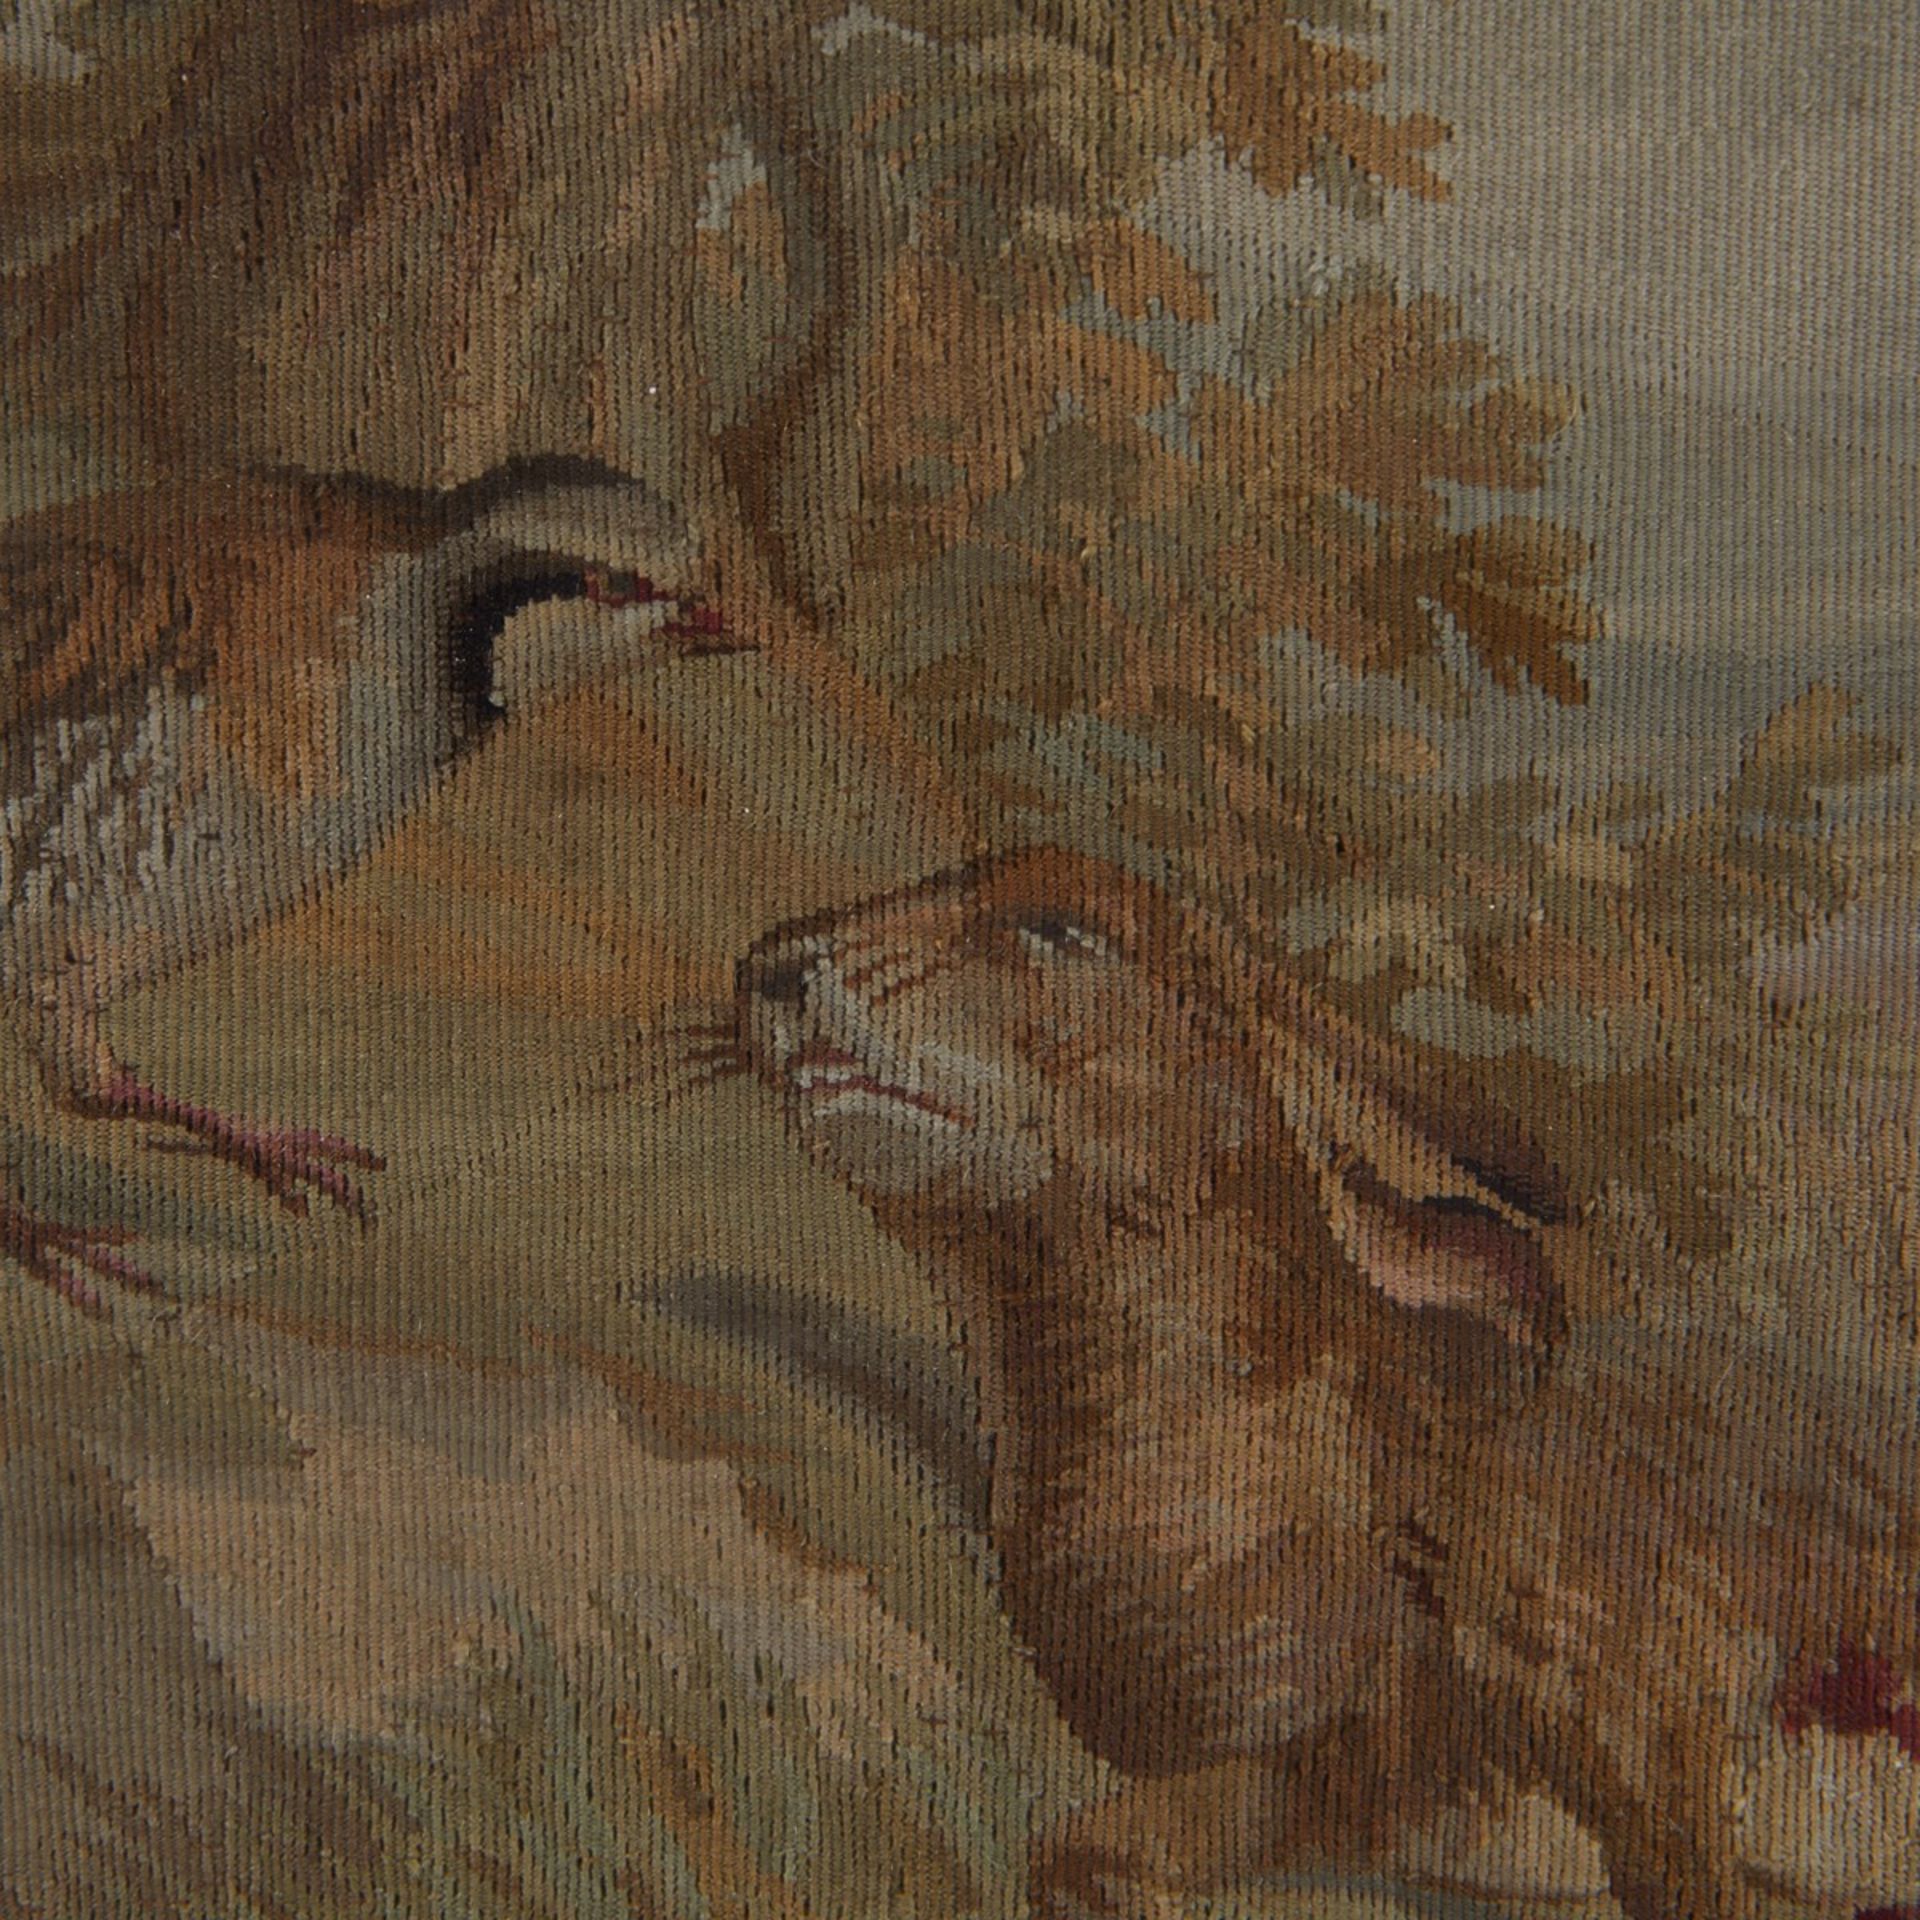 Pr 18th c. Aubusson French Tapestry Fragments - Image 4 of 9